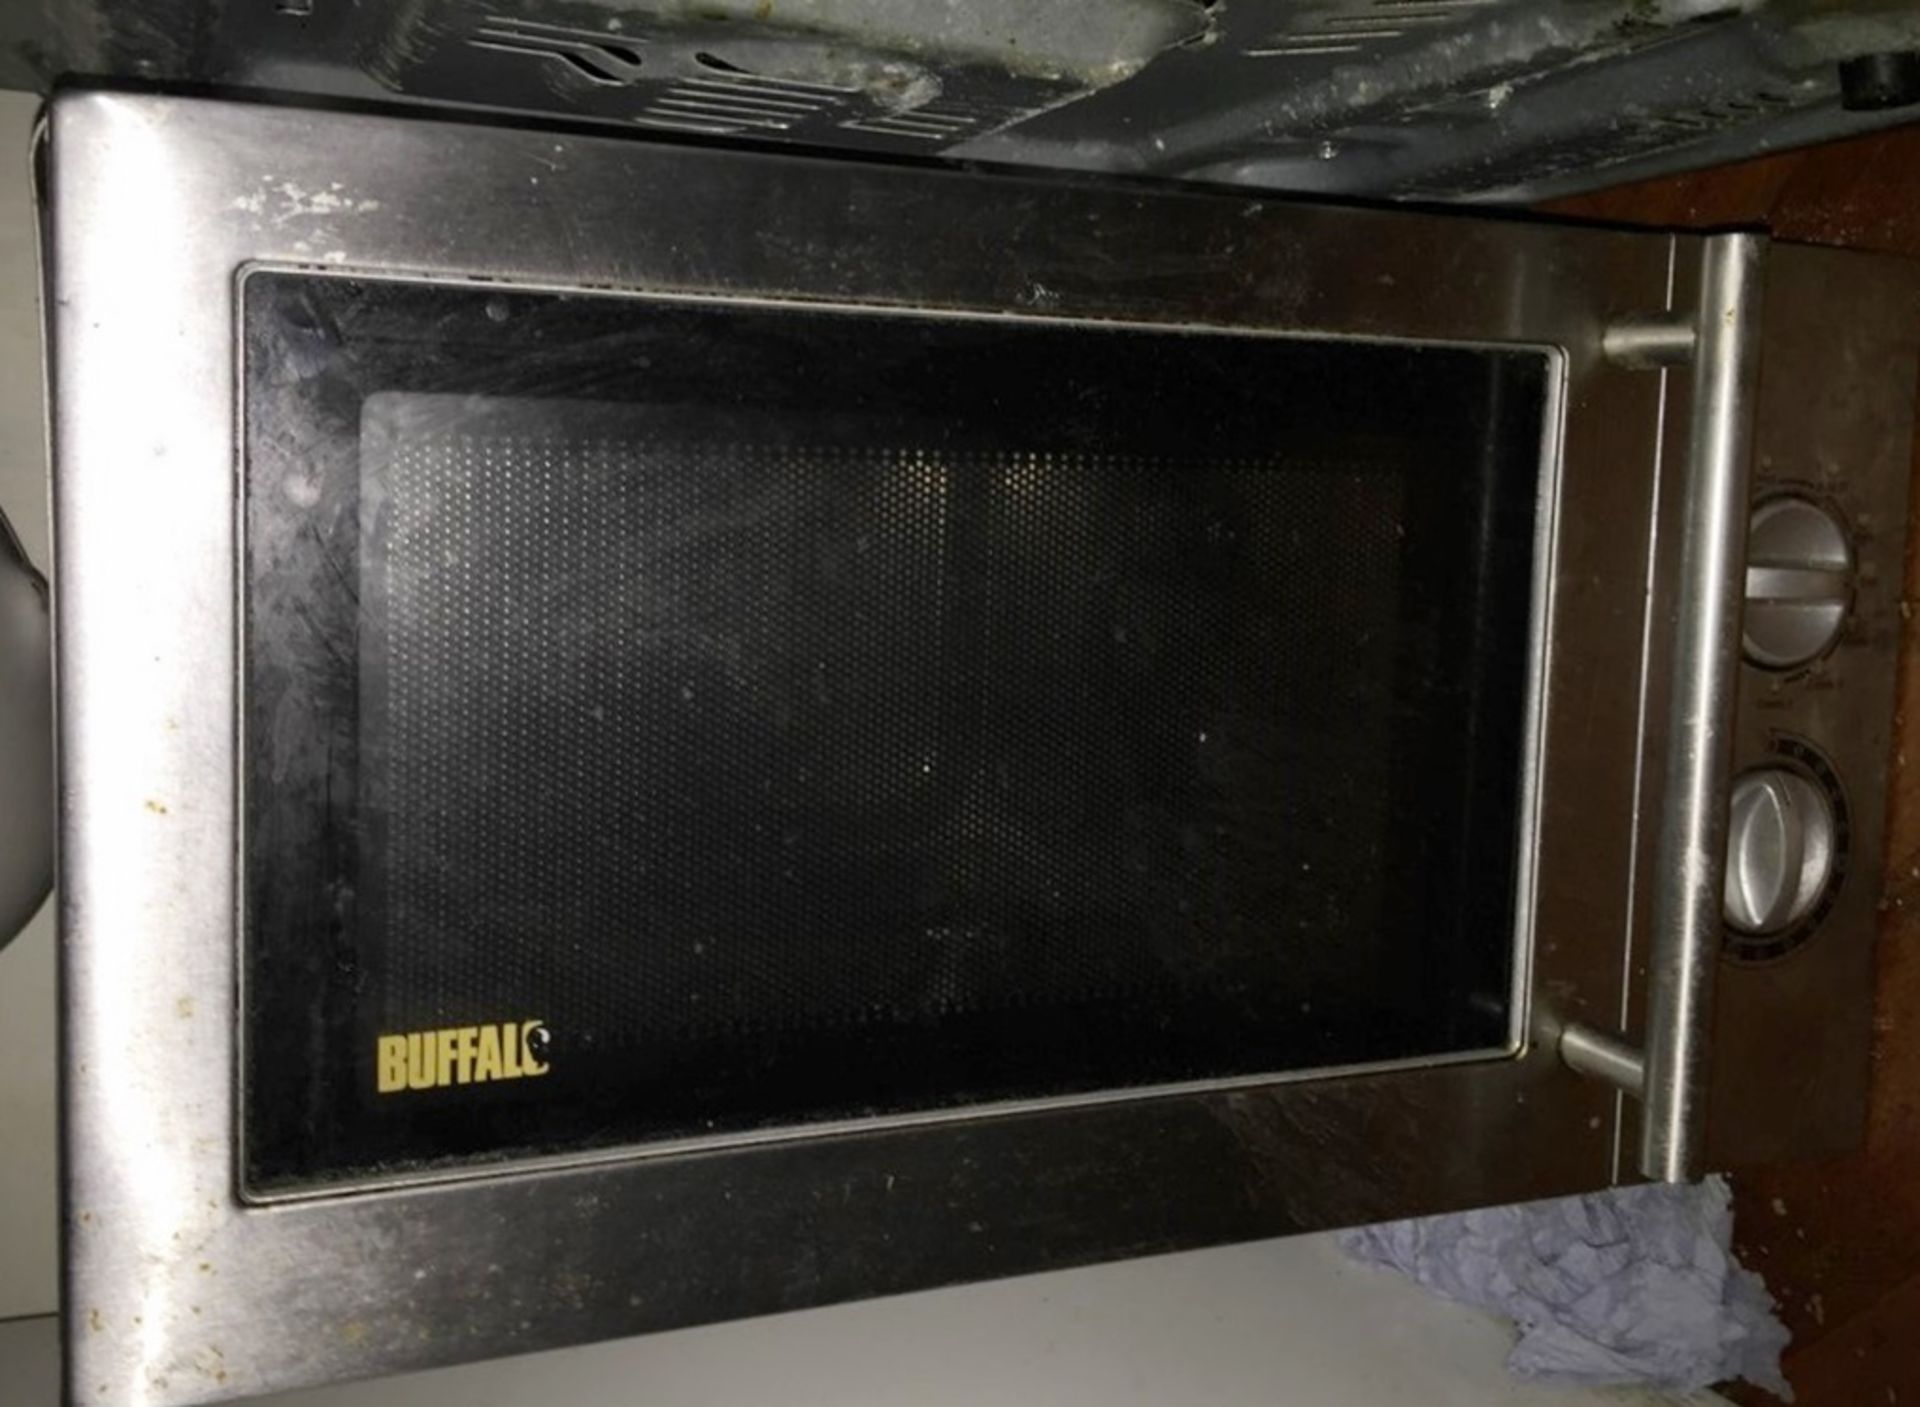 1 x Buffalo Commercial Kitchen Stainless Steel Microwave Oven - CL188 - Ref 2ND70 - Location: London